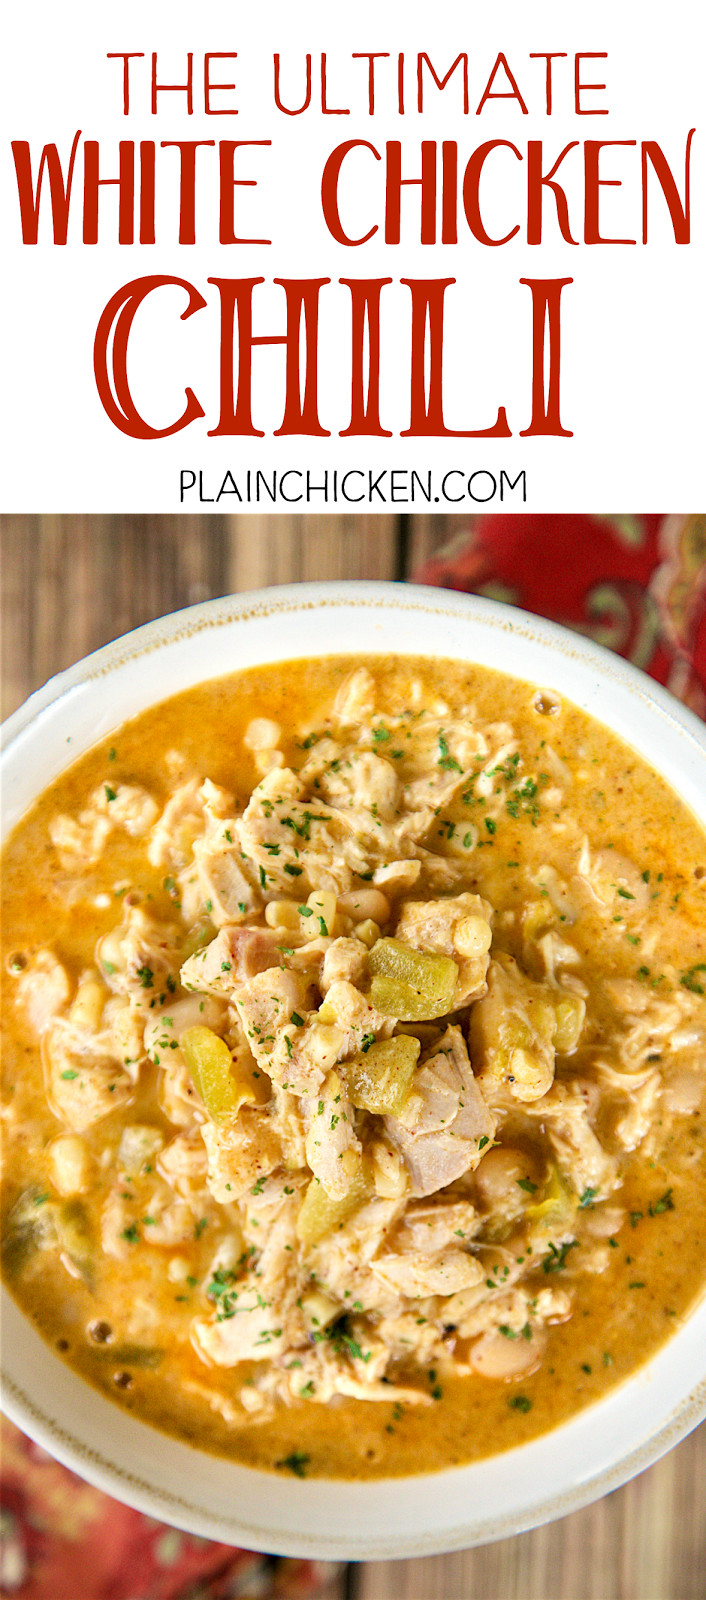 Chicken Chili With White Beans
 The Ultimate White Chicken Chili